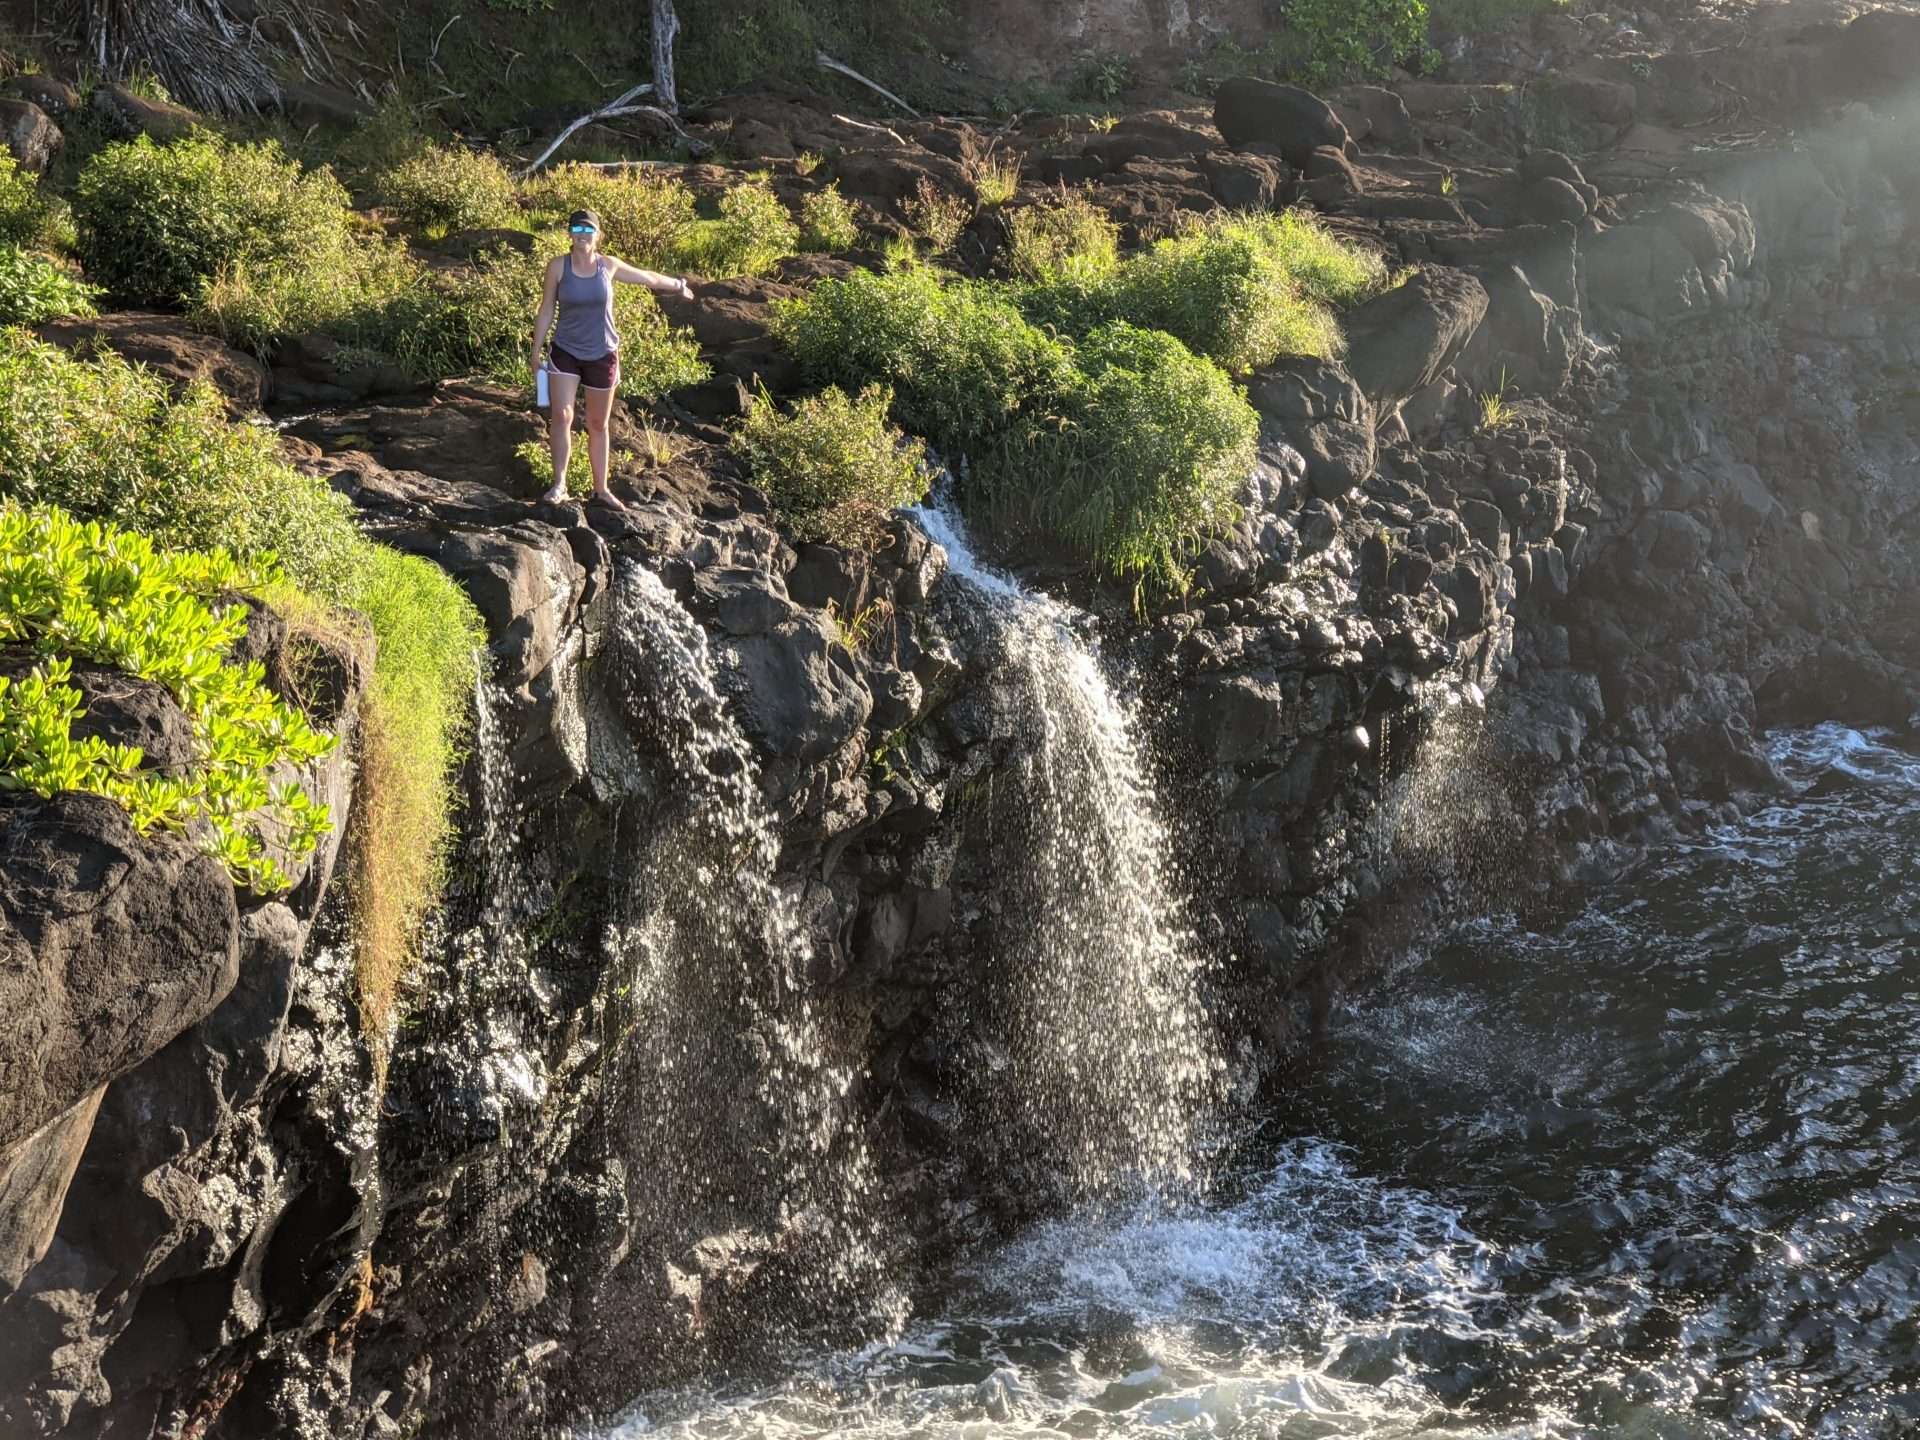 Caitlin from Mortons on the Move at the top of a waterfall while hiking in Hawaii